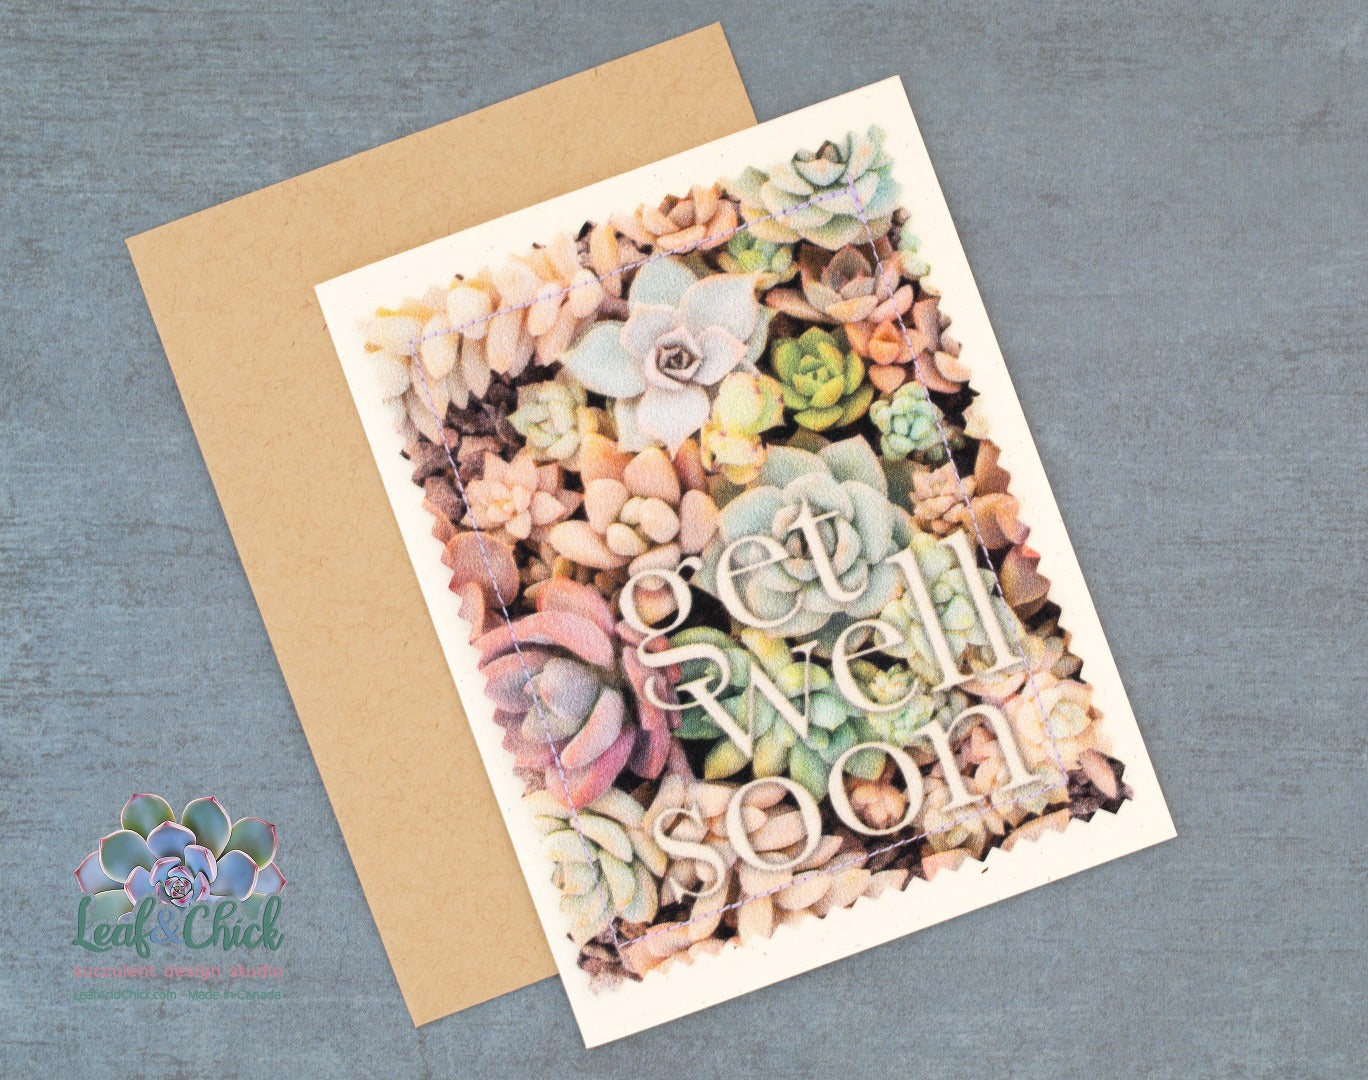 colourful succulent art greeting card